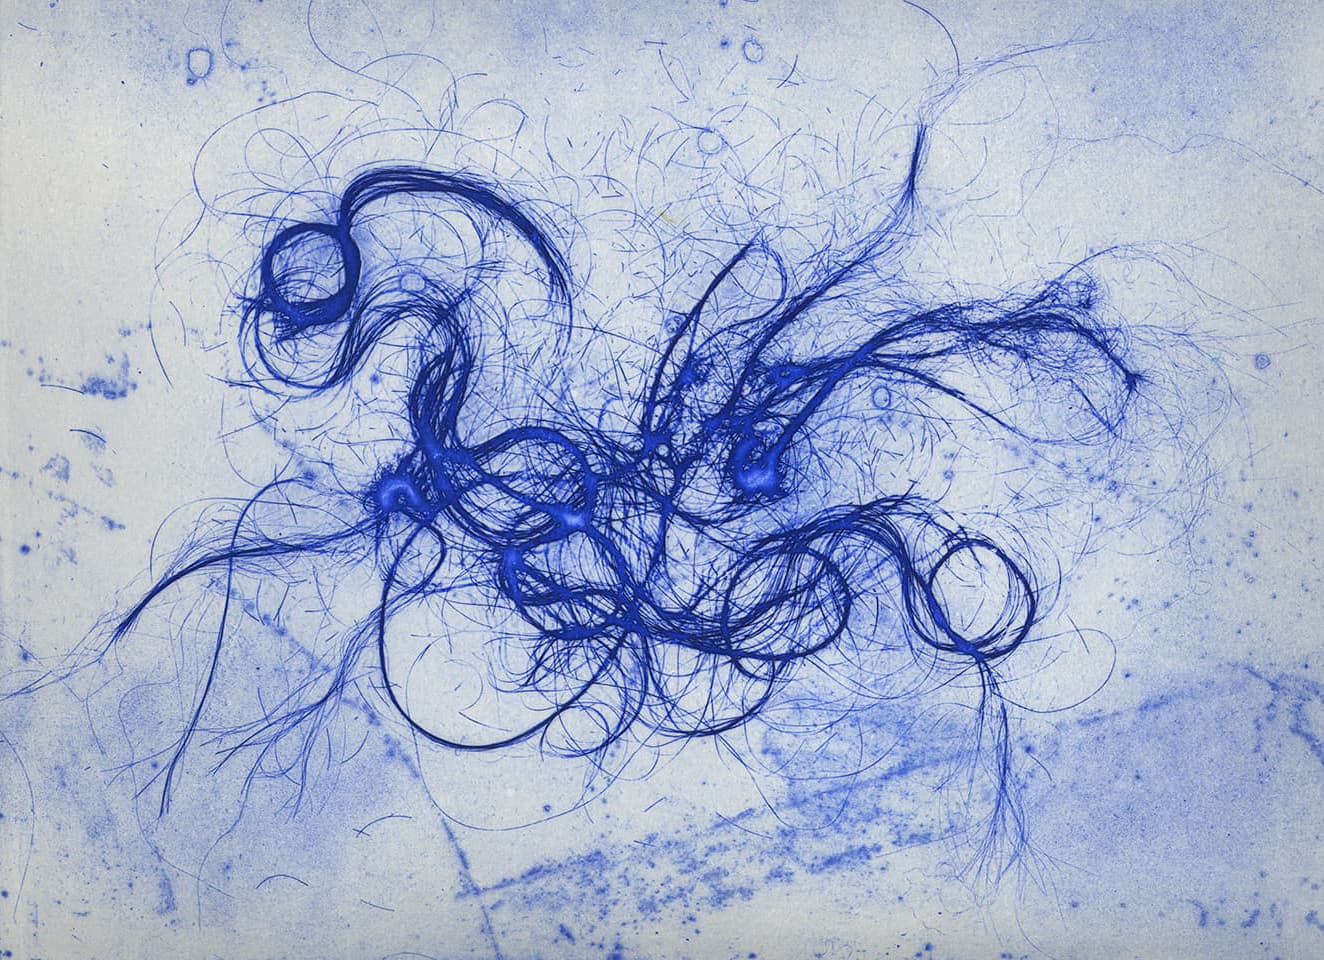 <strong>The Entangled Self 5</strong>, Susan Aldworth, etching, 25 x 31 cms, 2014.